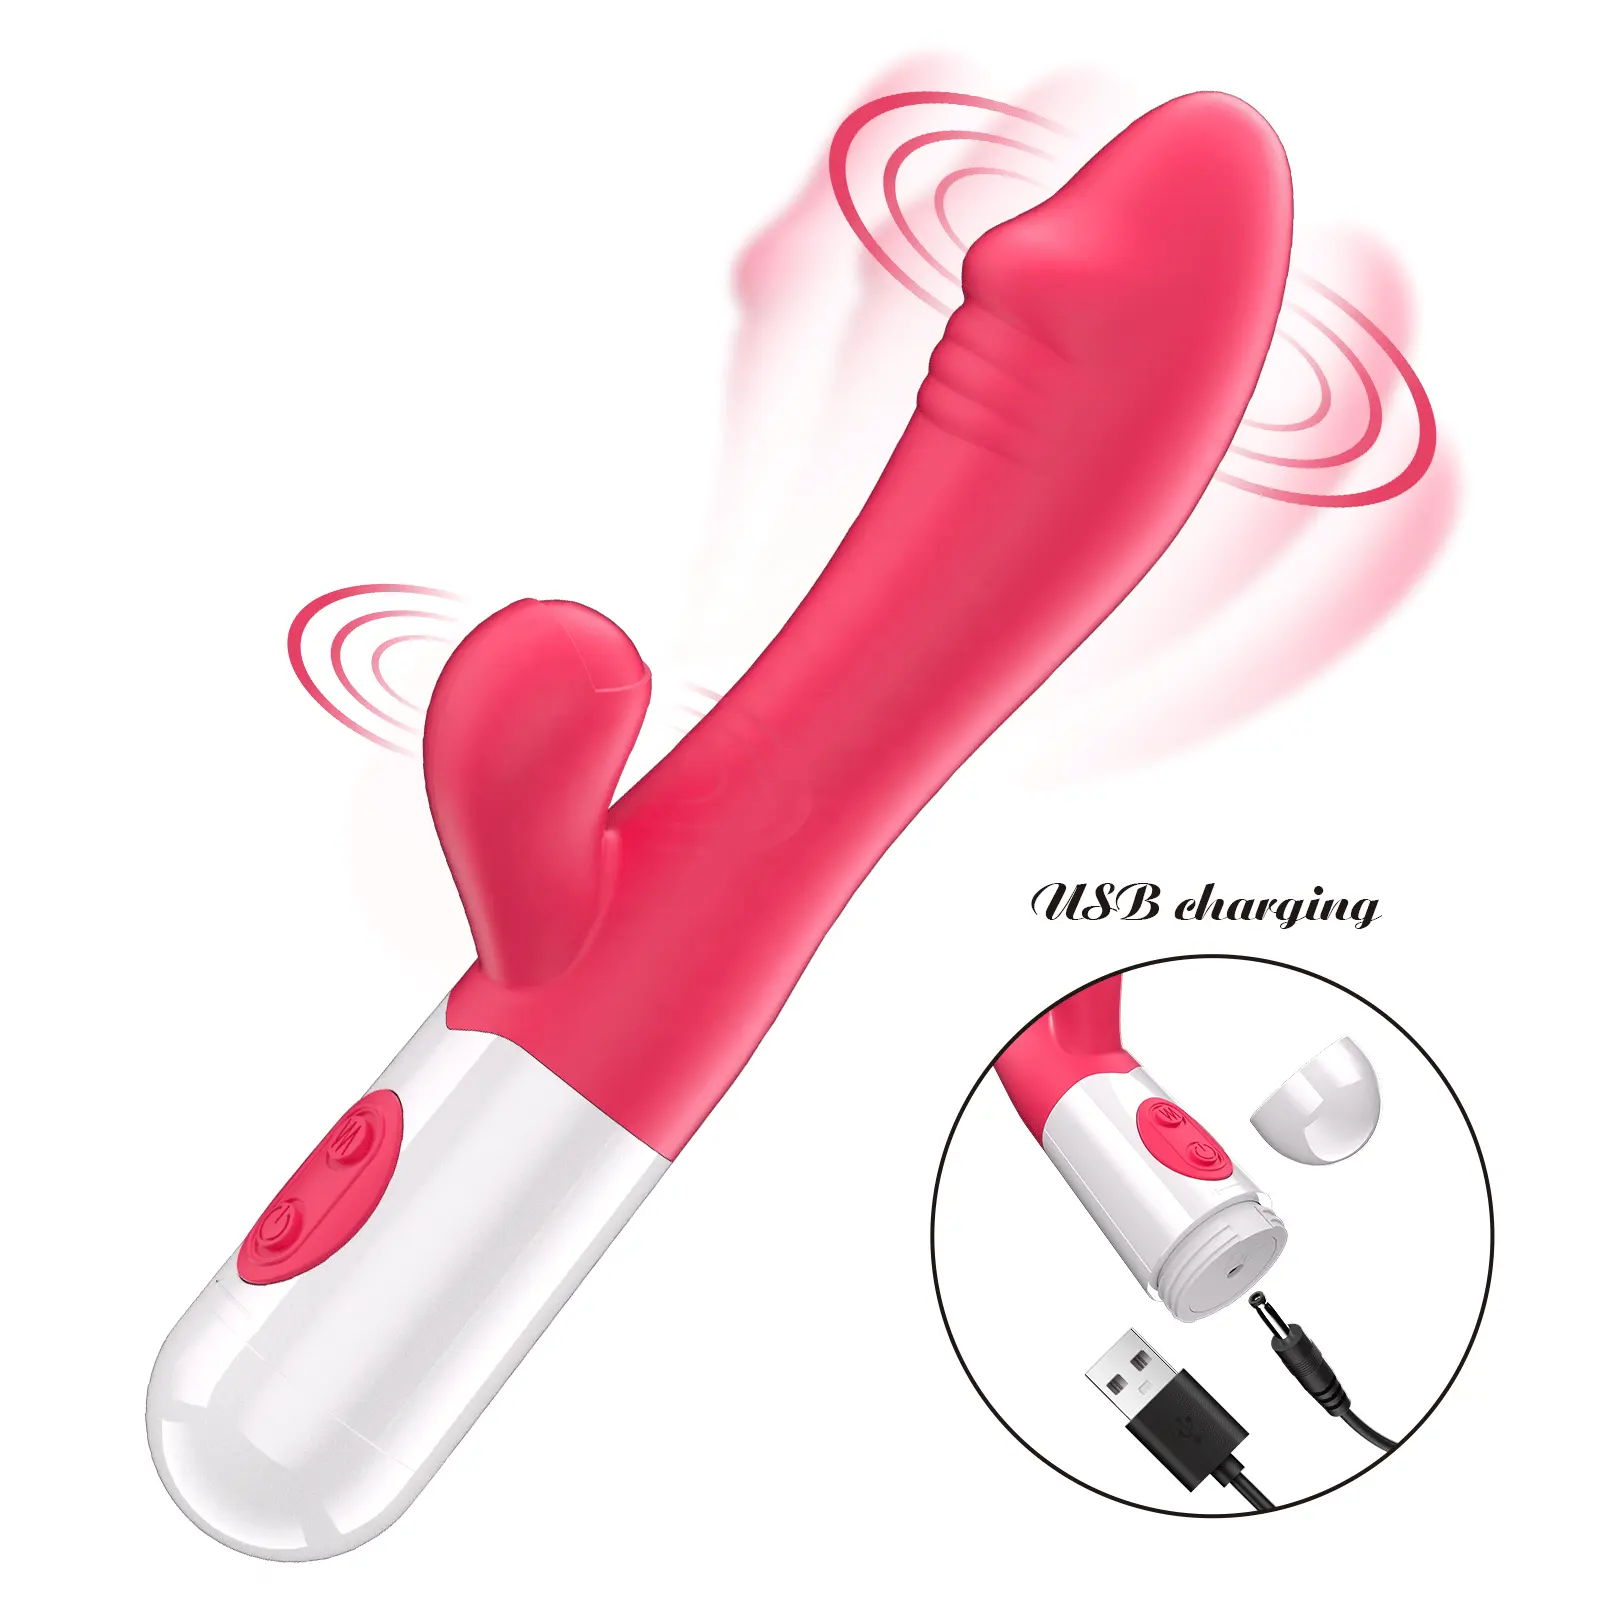 Wholesale Cheap Price Silicone G-Spot Rabbit Vibrator Toy for Women Adult Female Clitoris Stimulator Sex Products